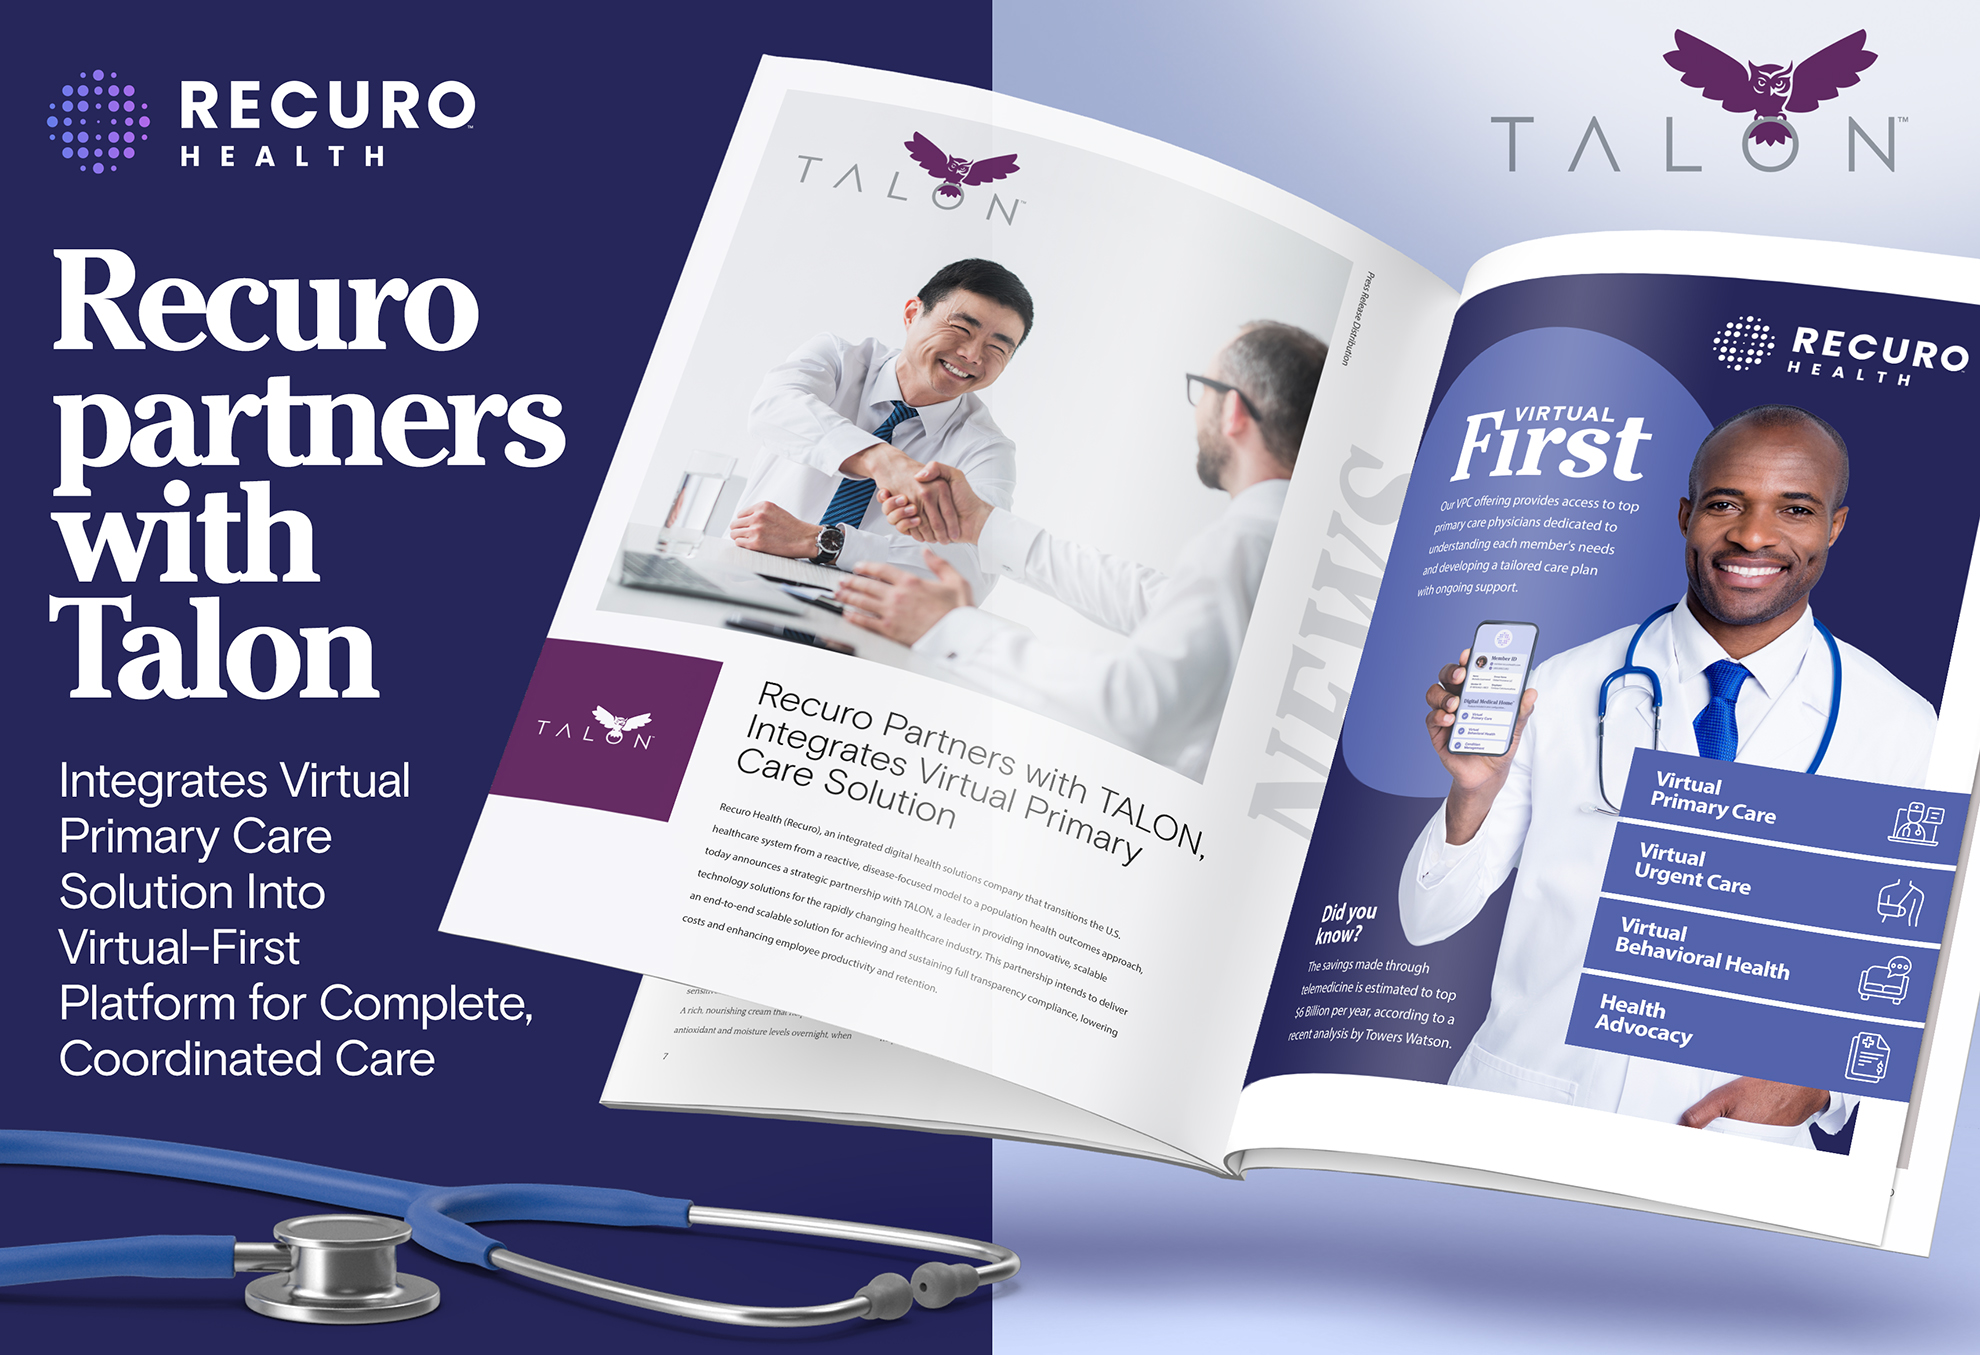 Recuro Partners with TALON, Integrates Virtual Primary Care Solution Into Virtual-First Platform